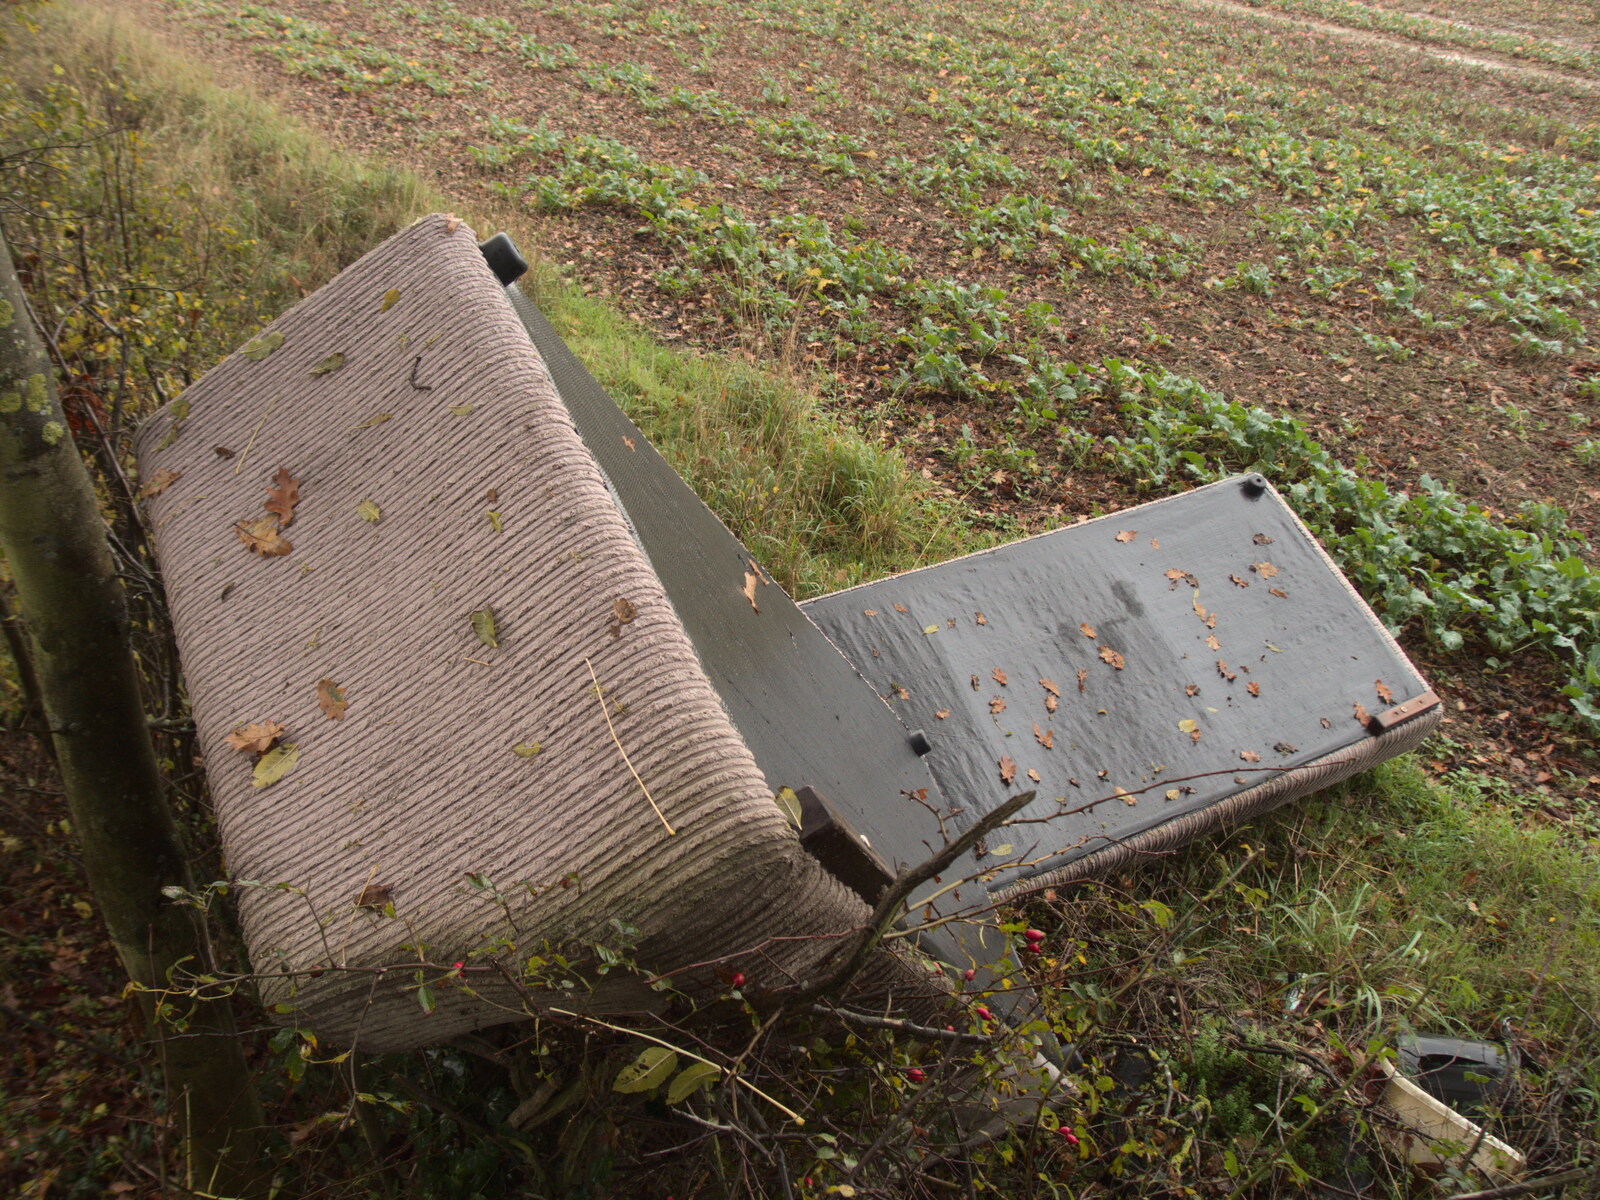 Abandoned sofa in a field from Pre-Lockdown in Station 119, Eye, Suffolk - 4th November 2020